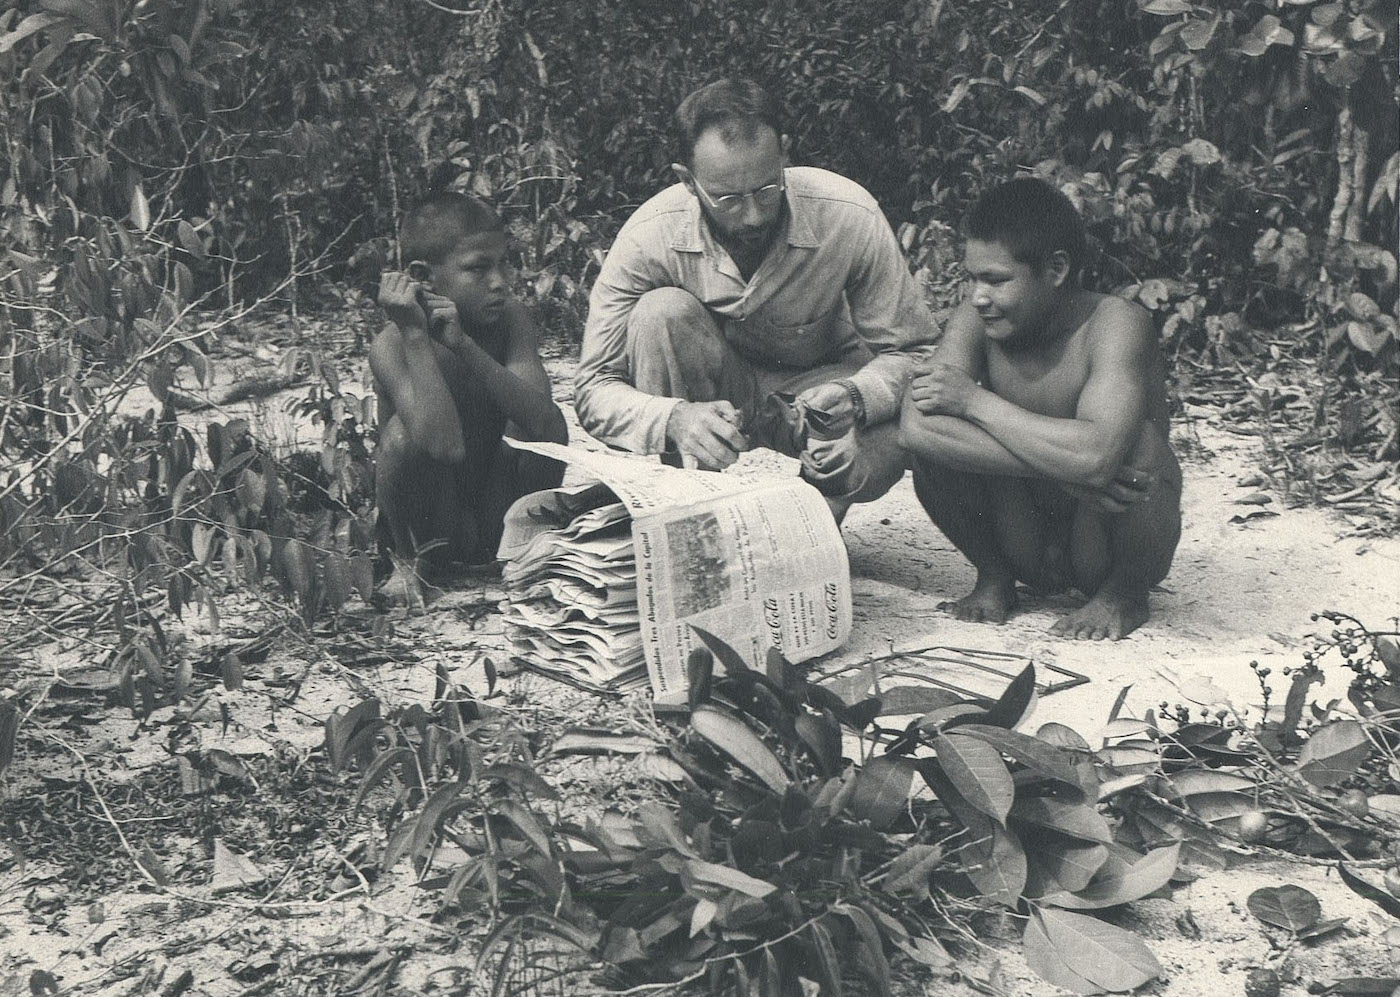 Richard Evans Schultes collecting plants with Maku assistants in 1952 (via Harvard University Herbaria)